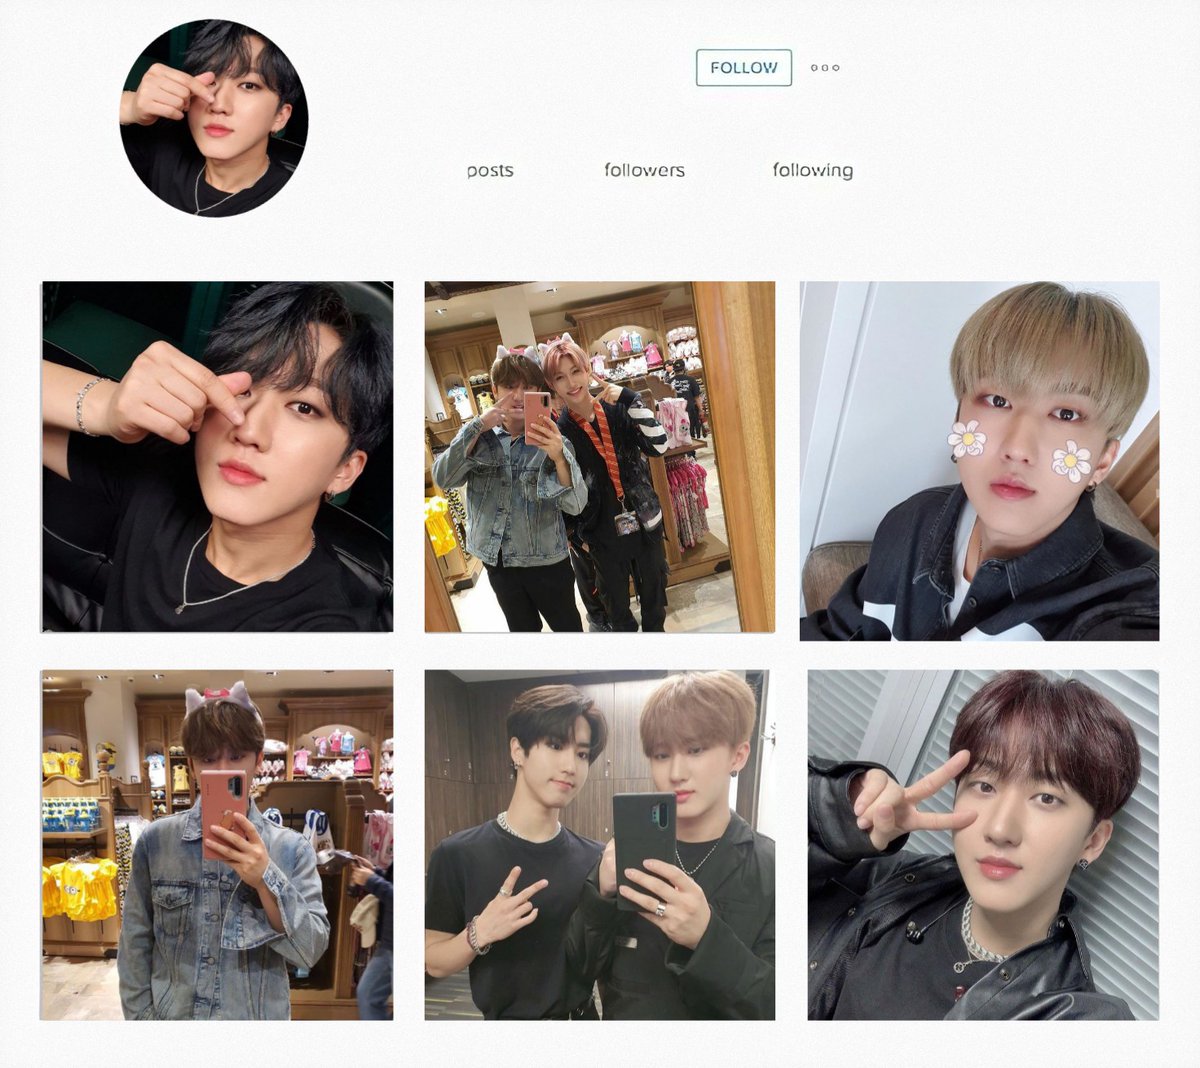 CHANGBIN— members will be featured on his feed— tons of selca with the “” sign or finger heart, cute filters for cute selcas ♡— probably updates once in every two weeks, i also feel like he would share his studio with us along with 3racha— random selcas #StrayKids